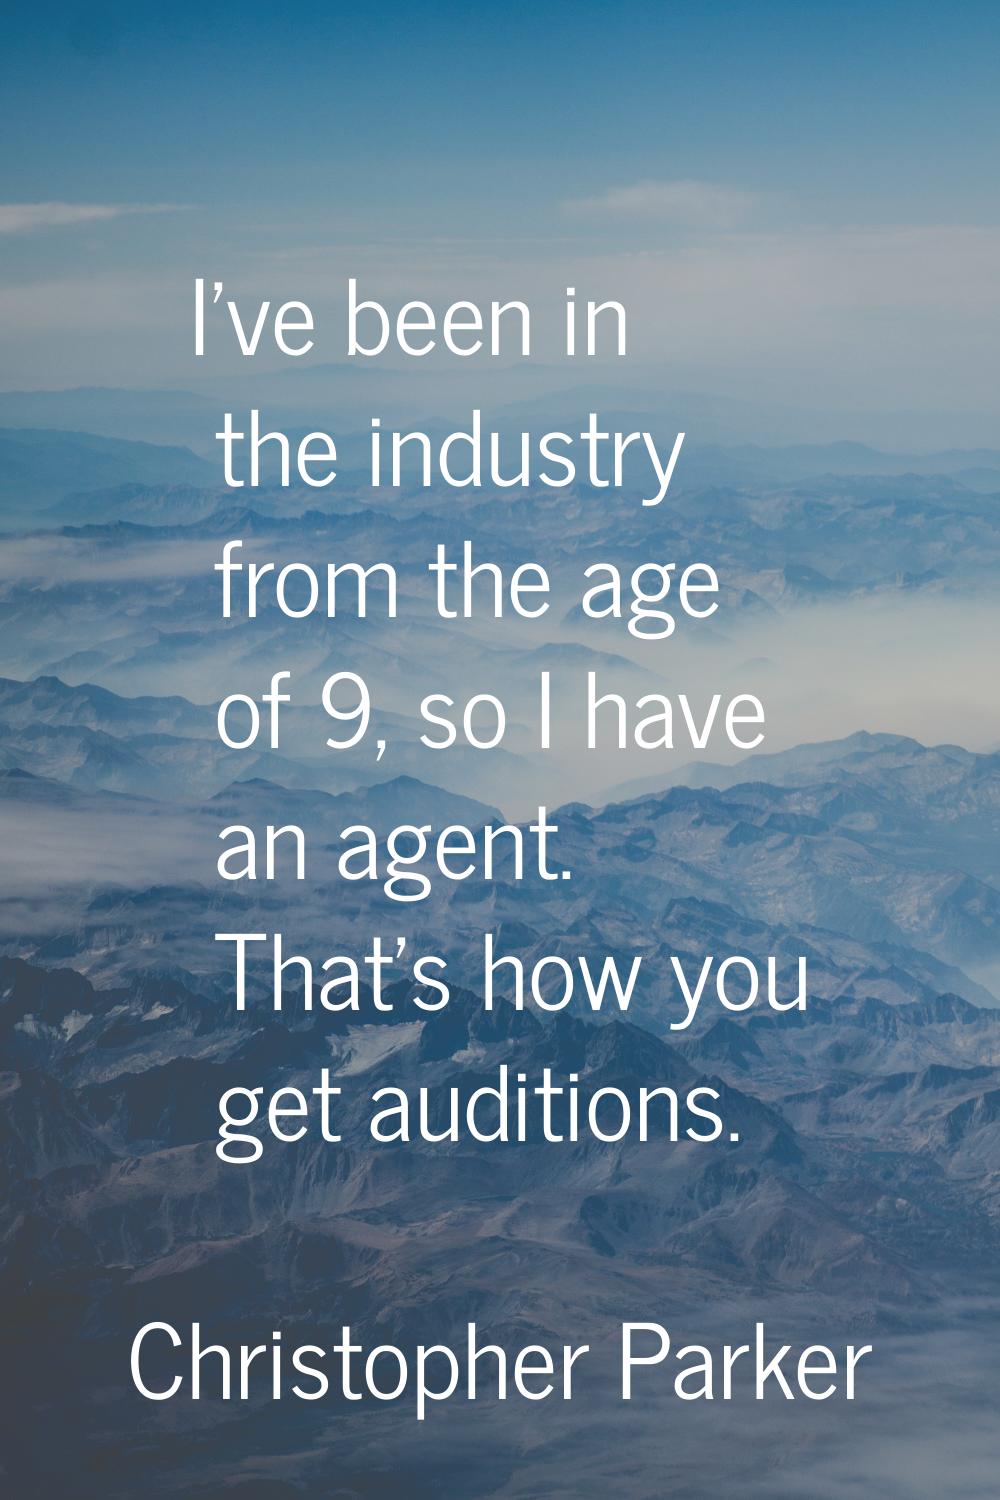 I've been in the industry from the age of 9, so I have an agent. That's how you get auditions.